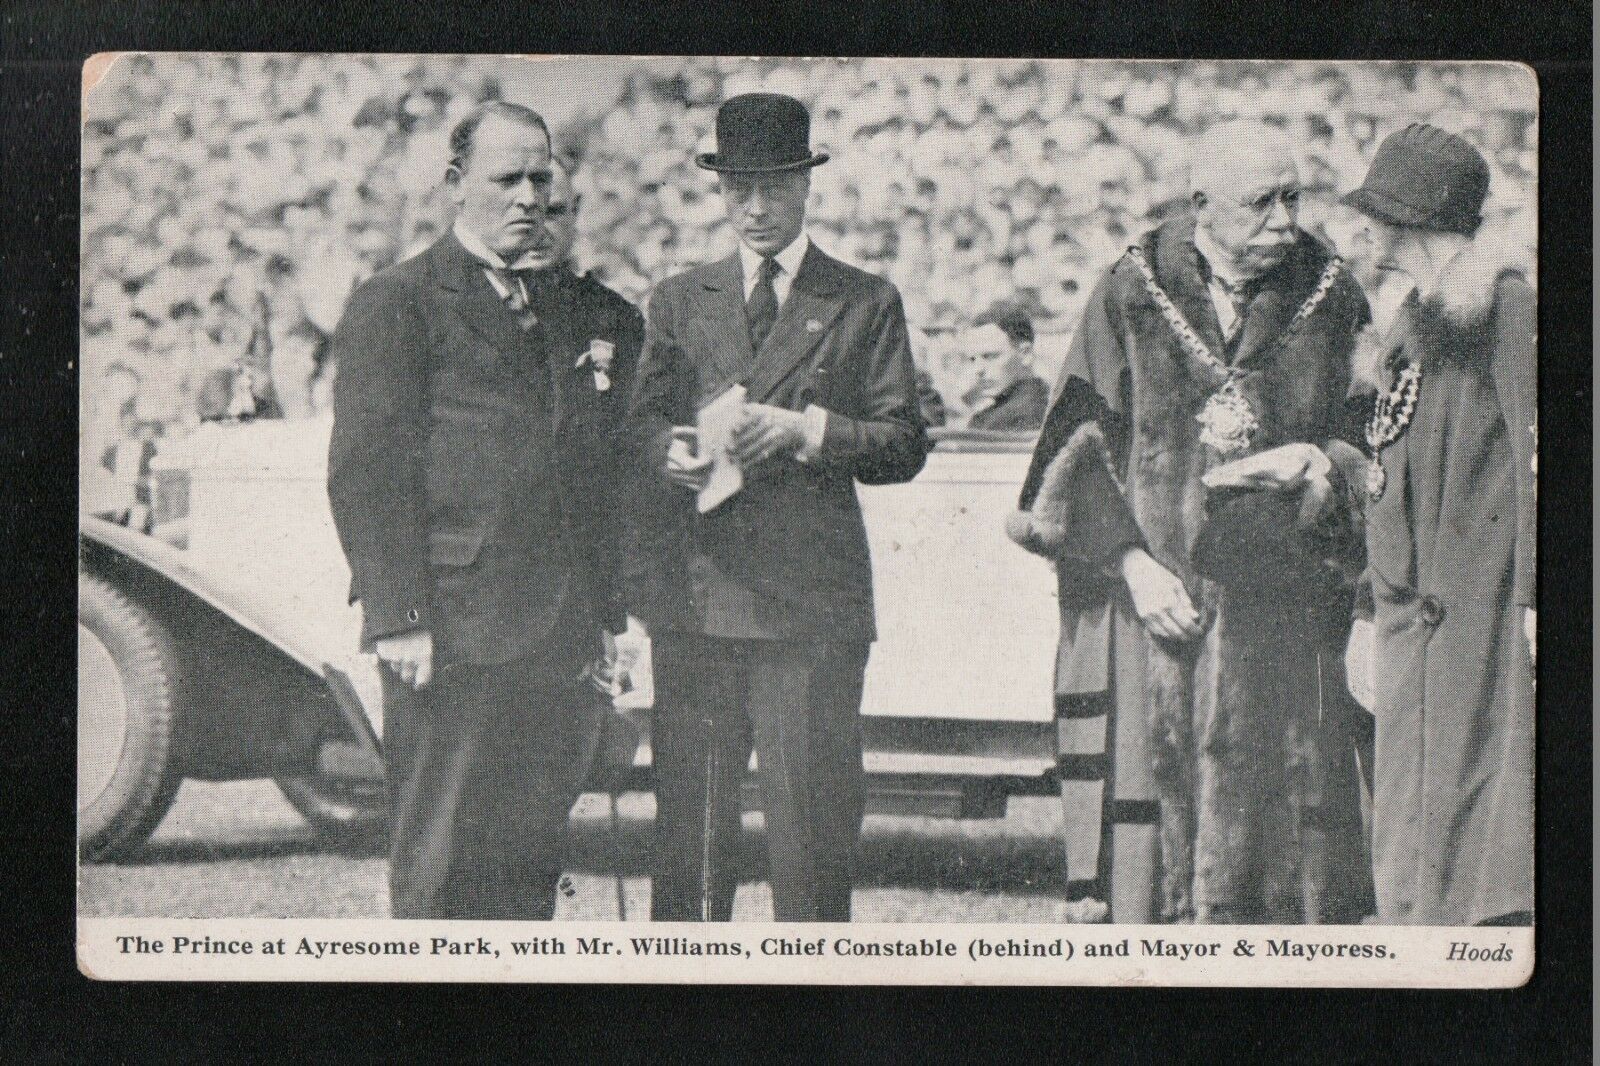 House Clearance - Prince at Ayresome Park with Chief Constable Middlesbrough 1920's Hood Service